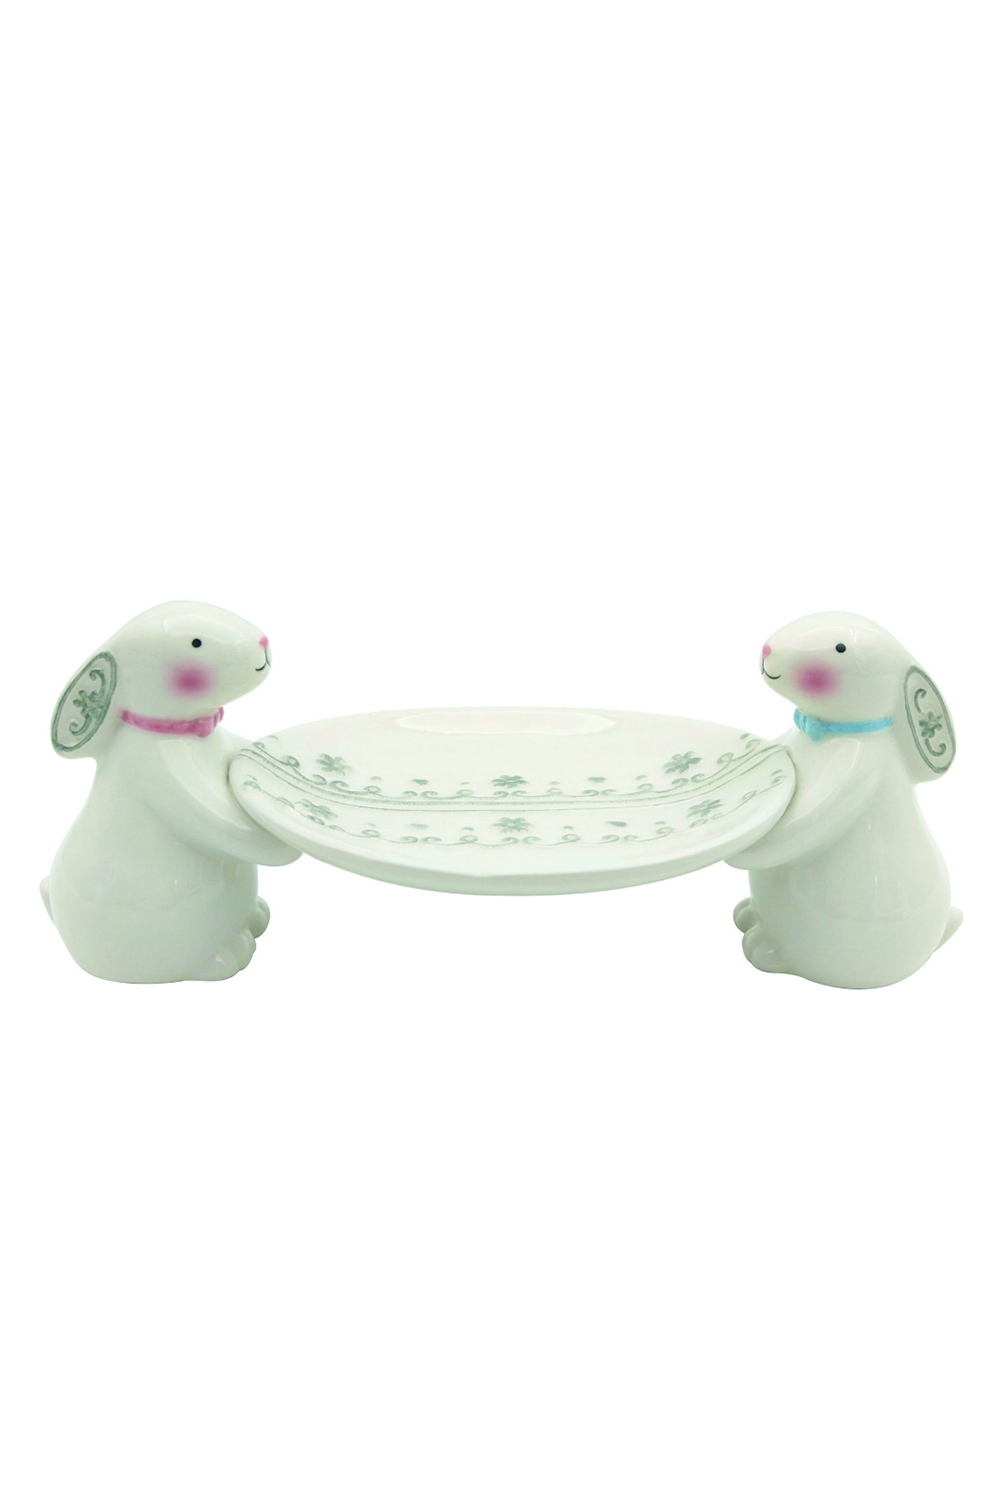 Patterned Bunny Elevated Platter